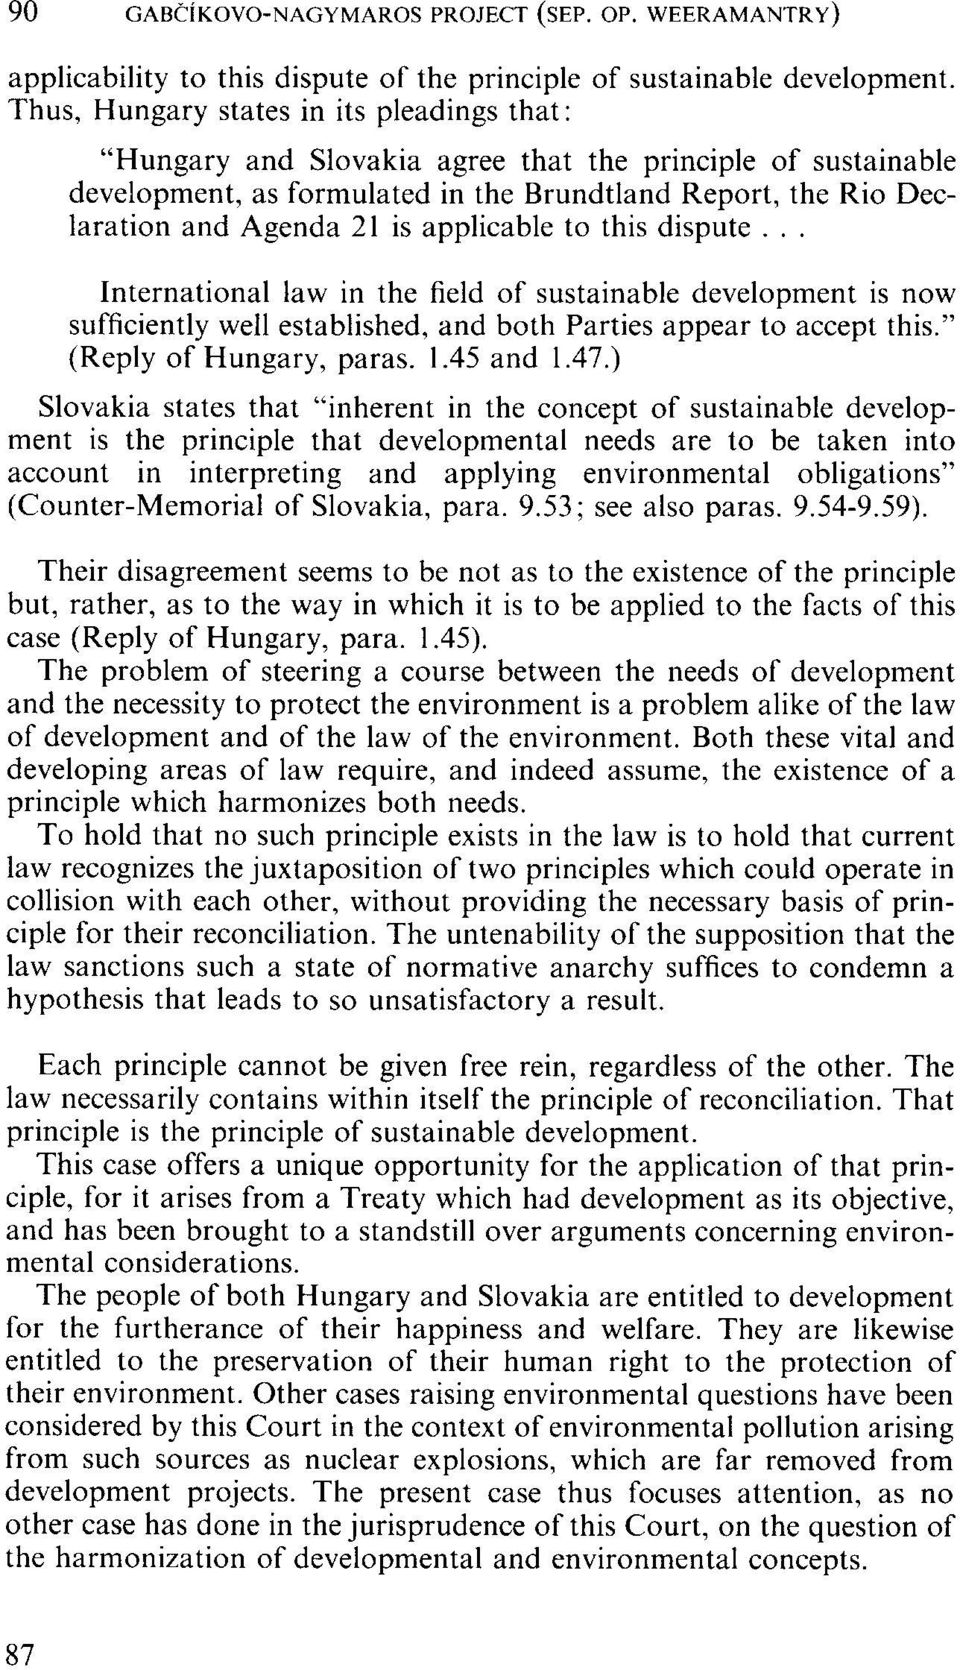 applicable to this dispute... International law in the field of sustainable development is now sufficiently well established, and both Parties appear to accept this." (Reply of Hungary, paras. 1.